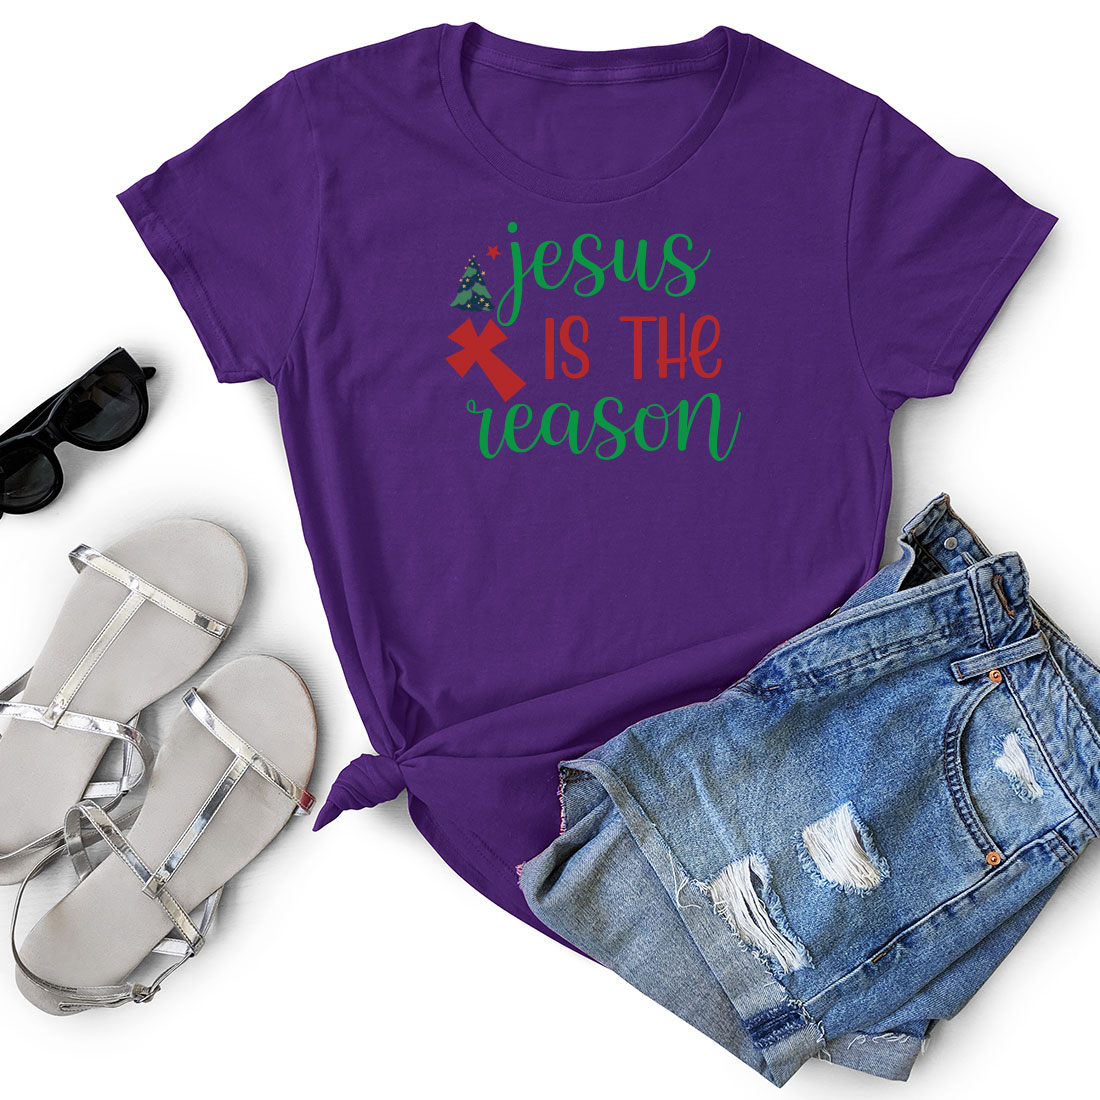 T - shirt that says jesus is the reason next to a pair of shorts.